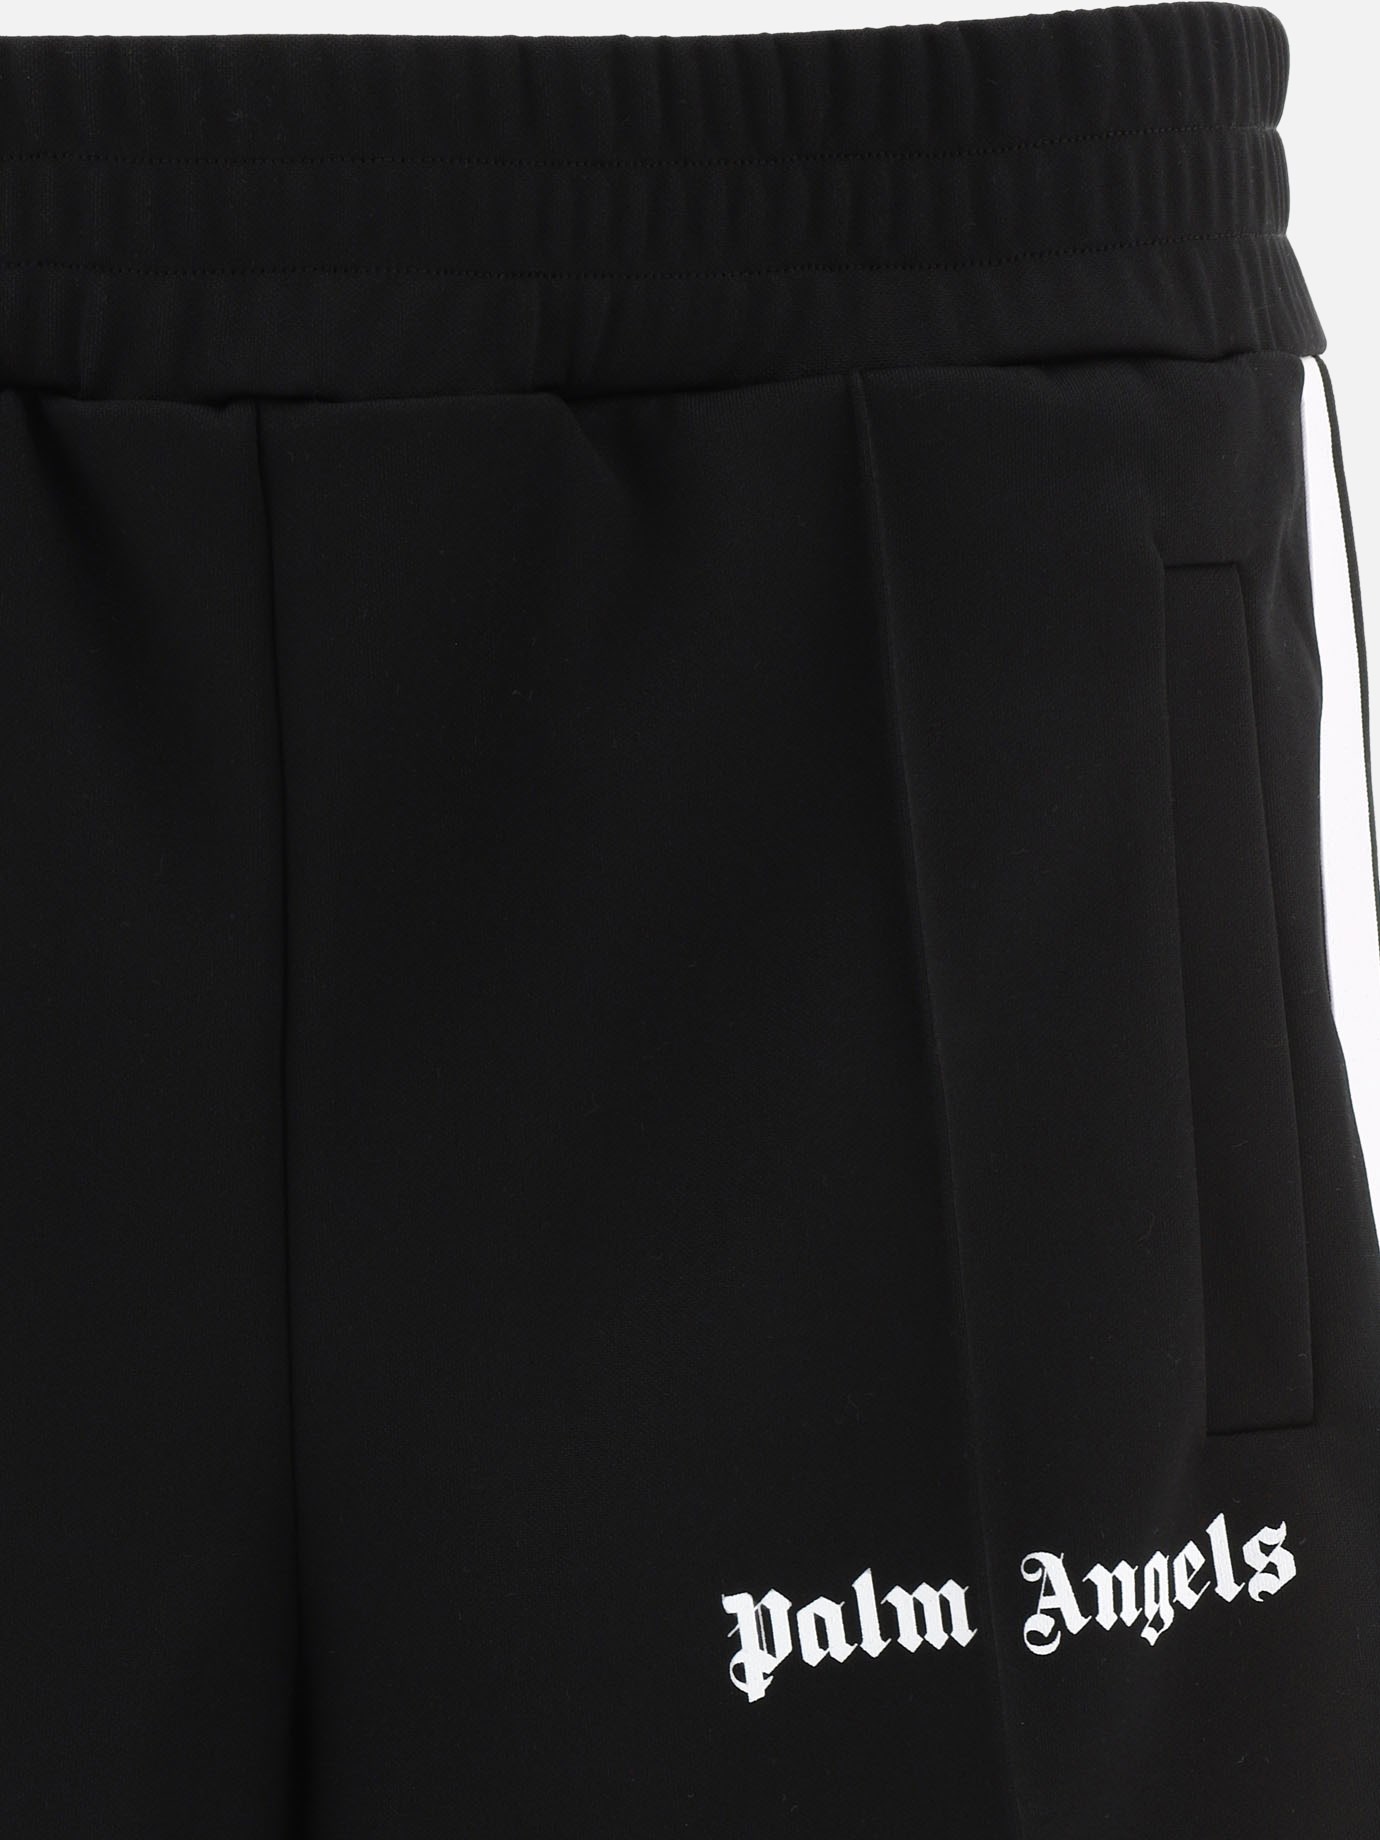  Classic Track  shorts by Palm Angels